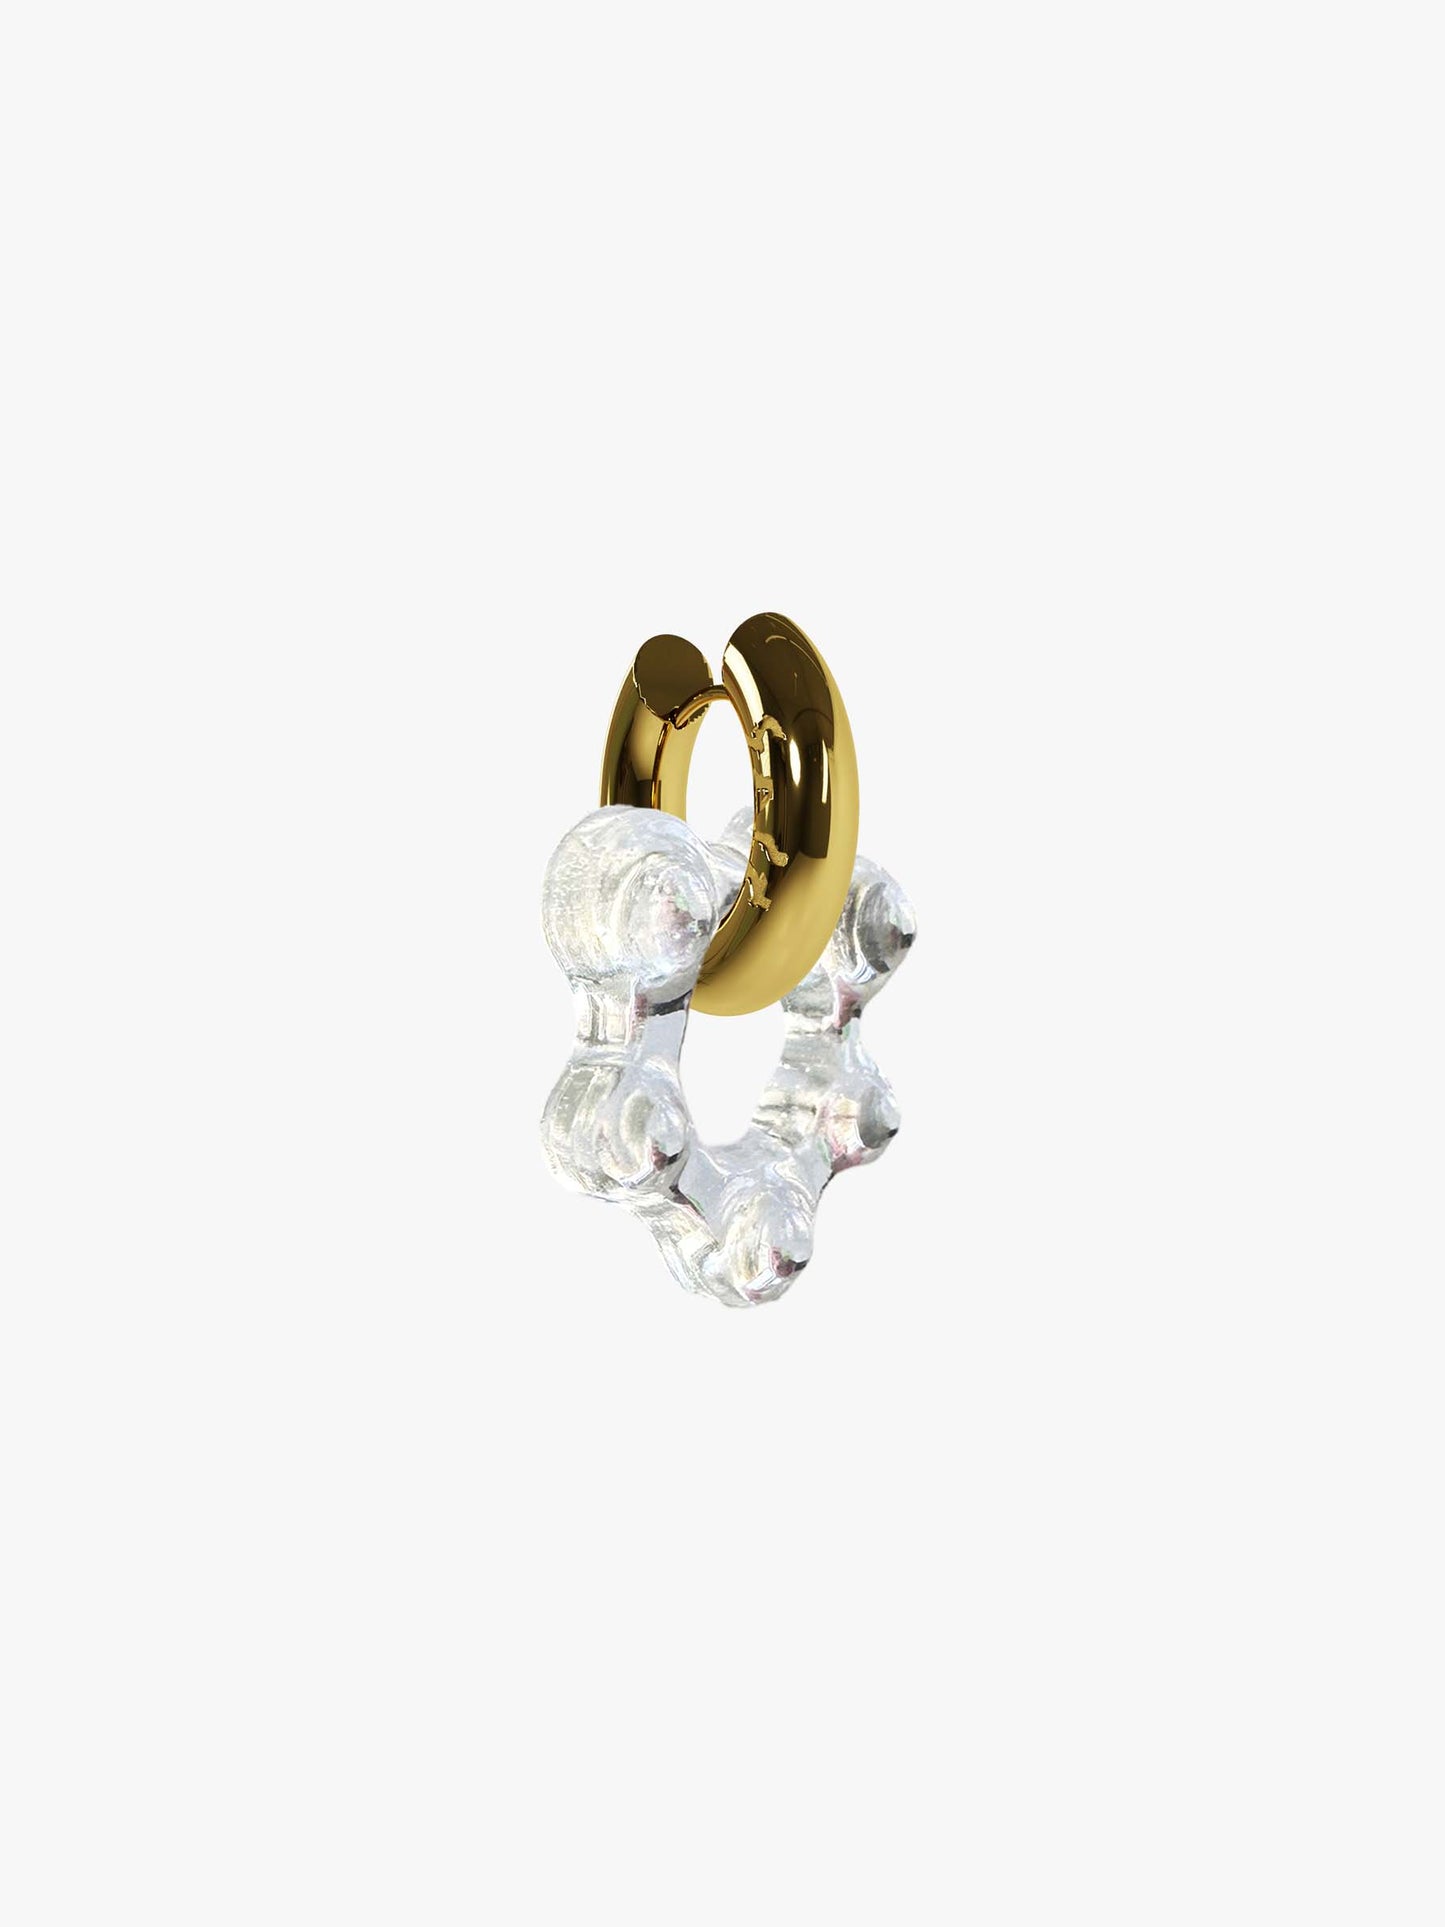 Oyo transparent gold earring (pair)